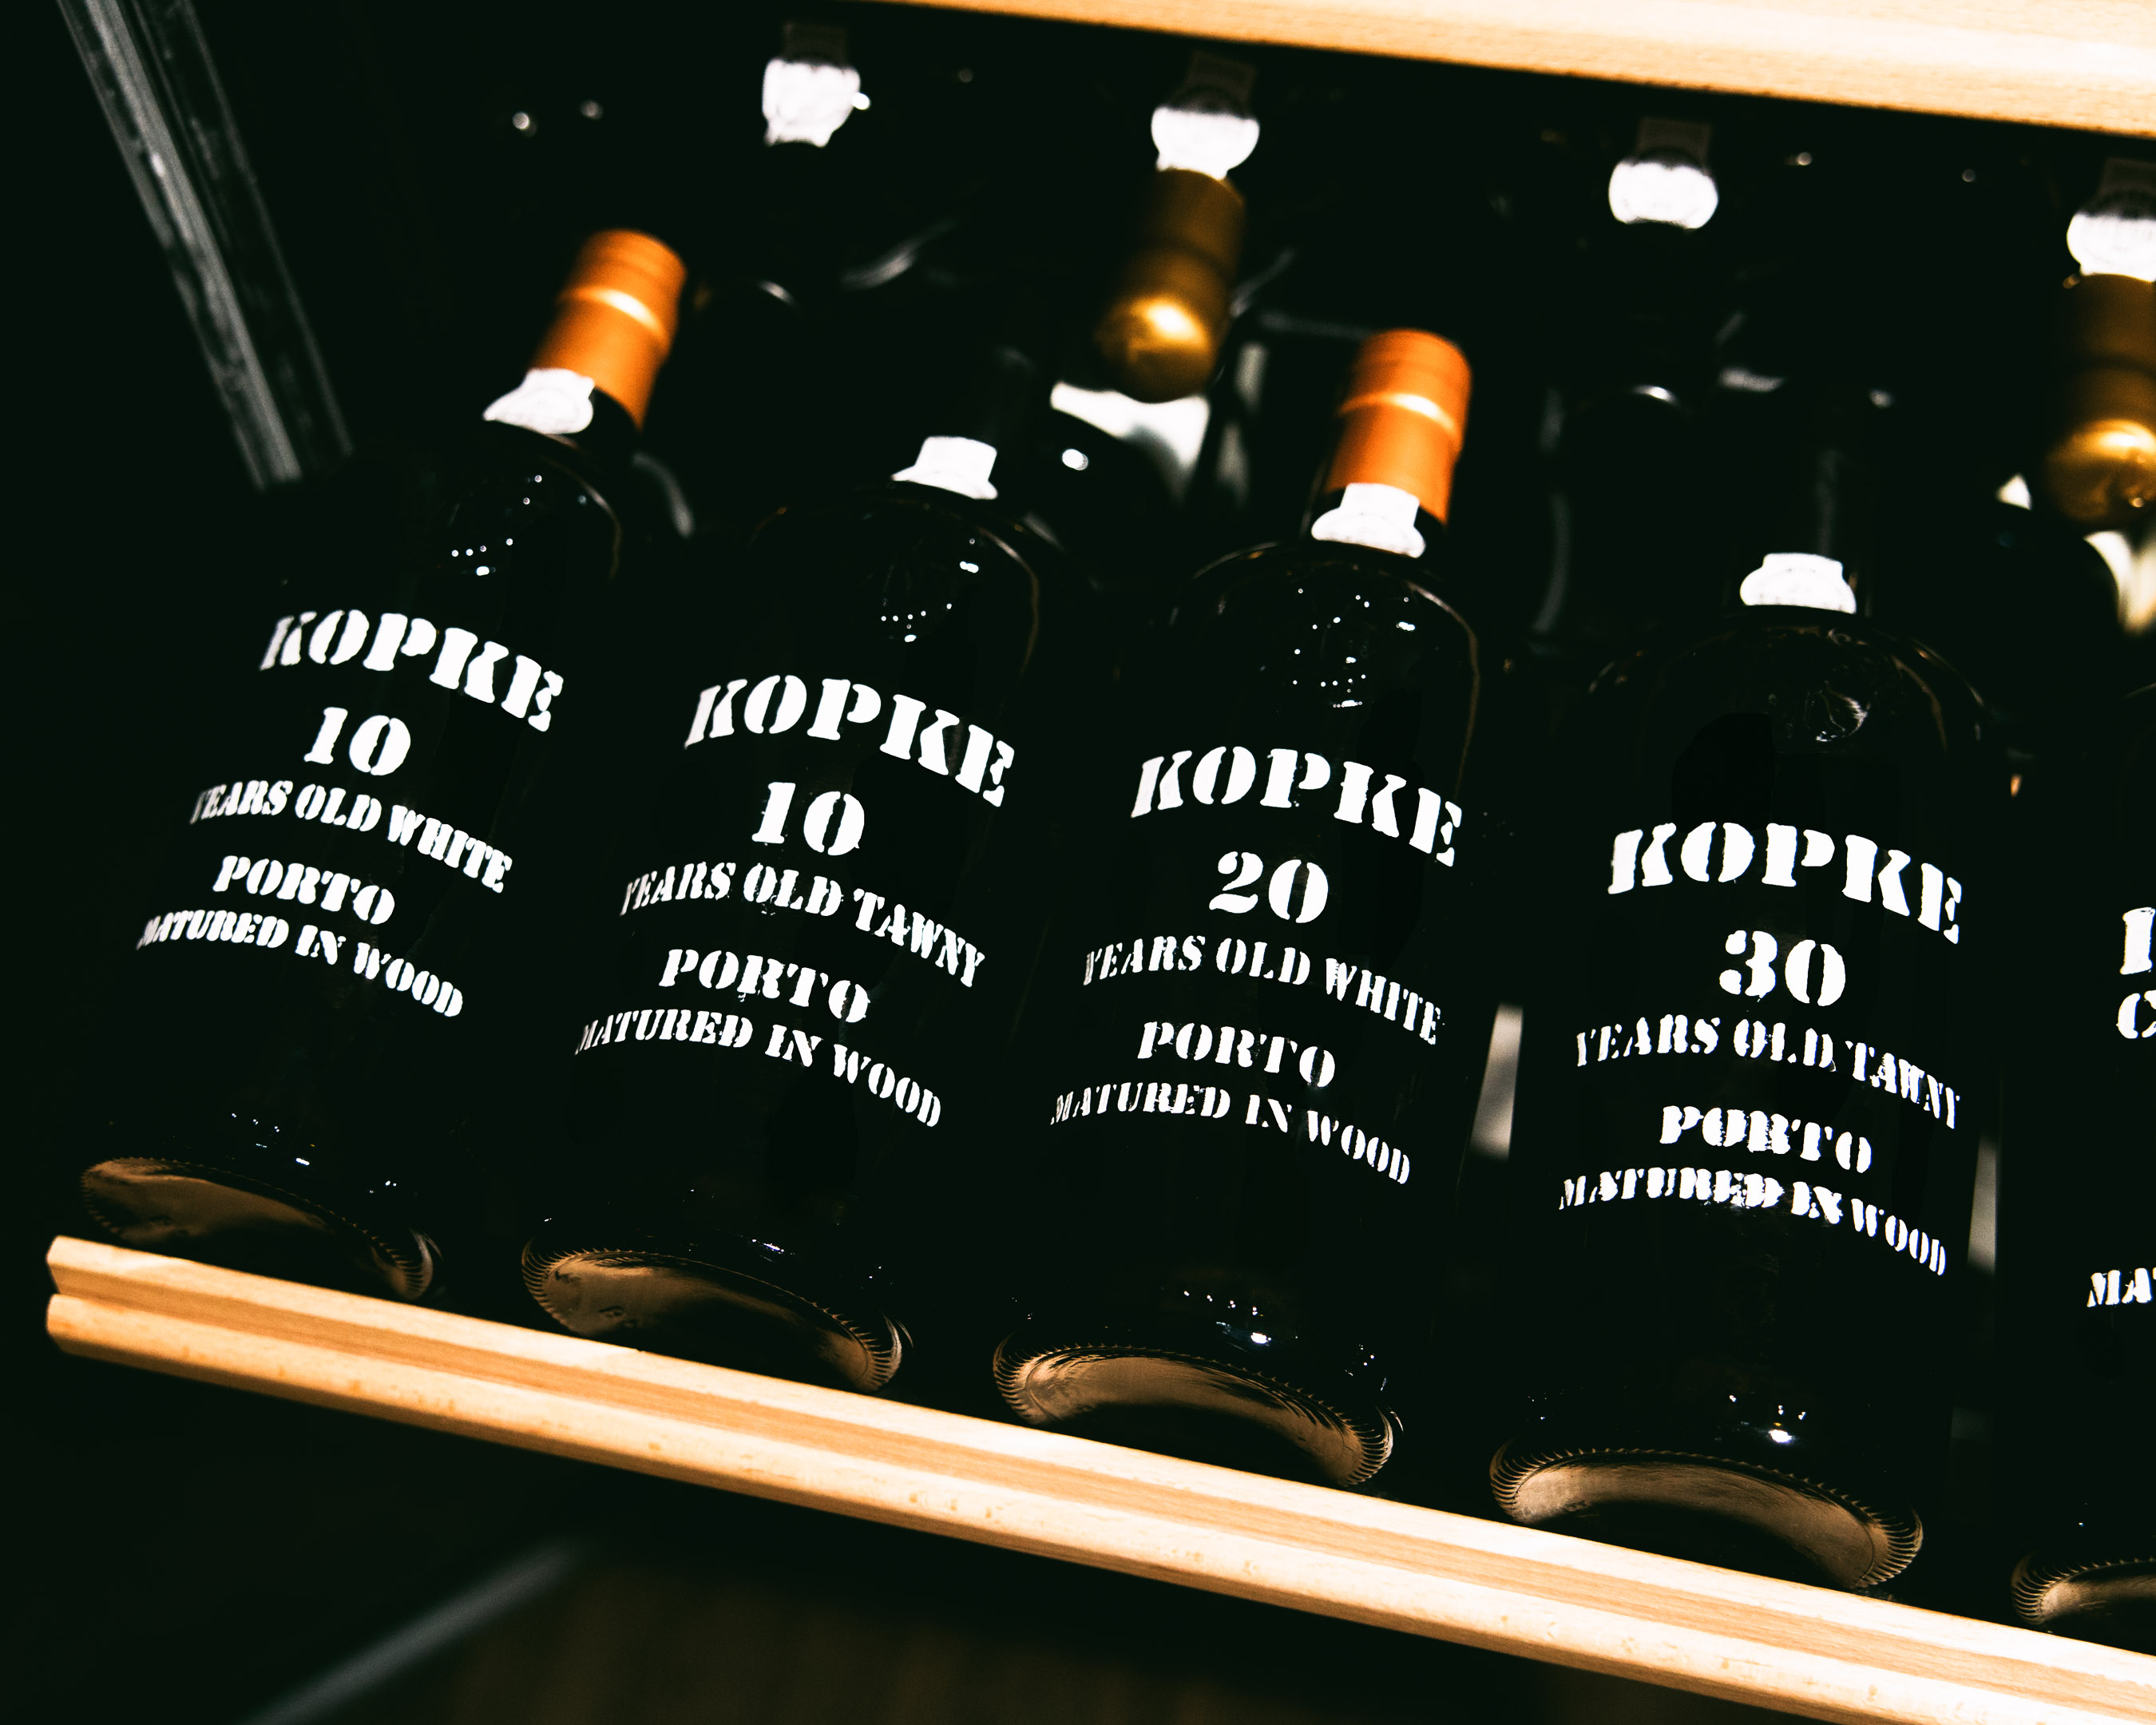 Introducing Kopke: The Oldest Port House in the World 4